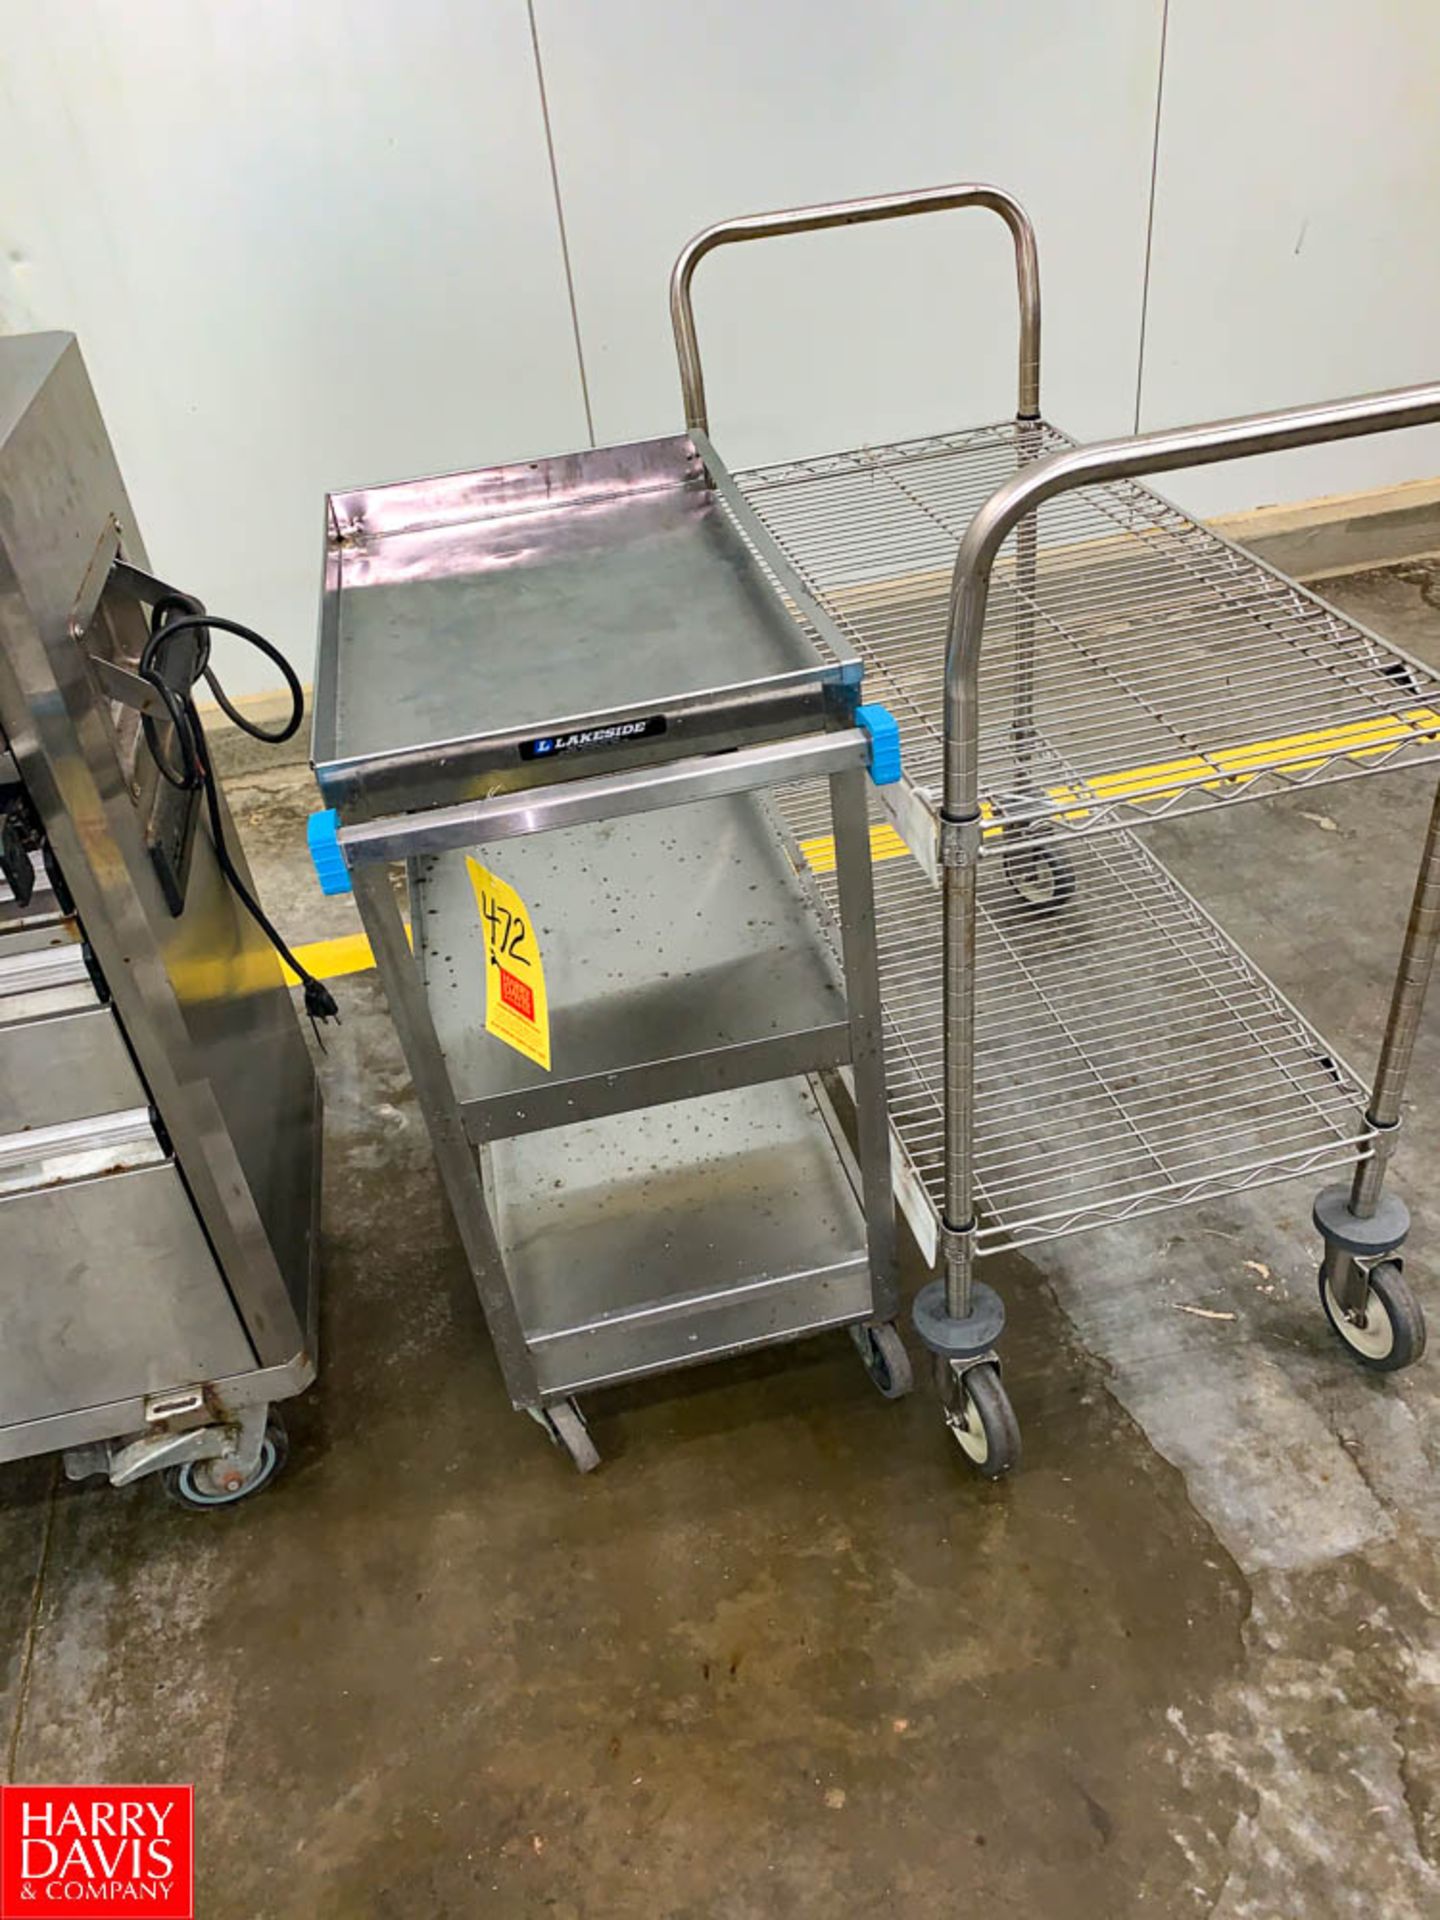 Lakeside S/S Cart and Chrome Wire Cart Rigging Fee: $ 30